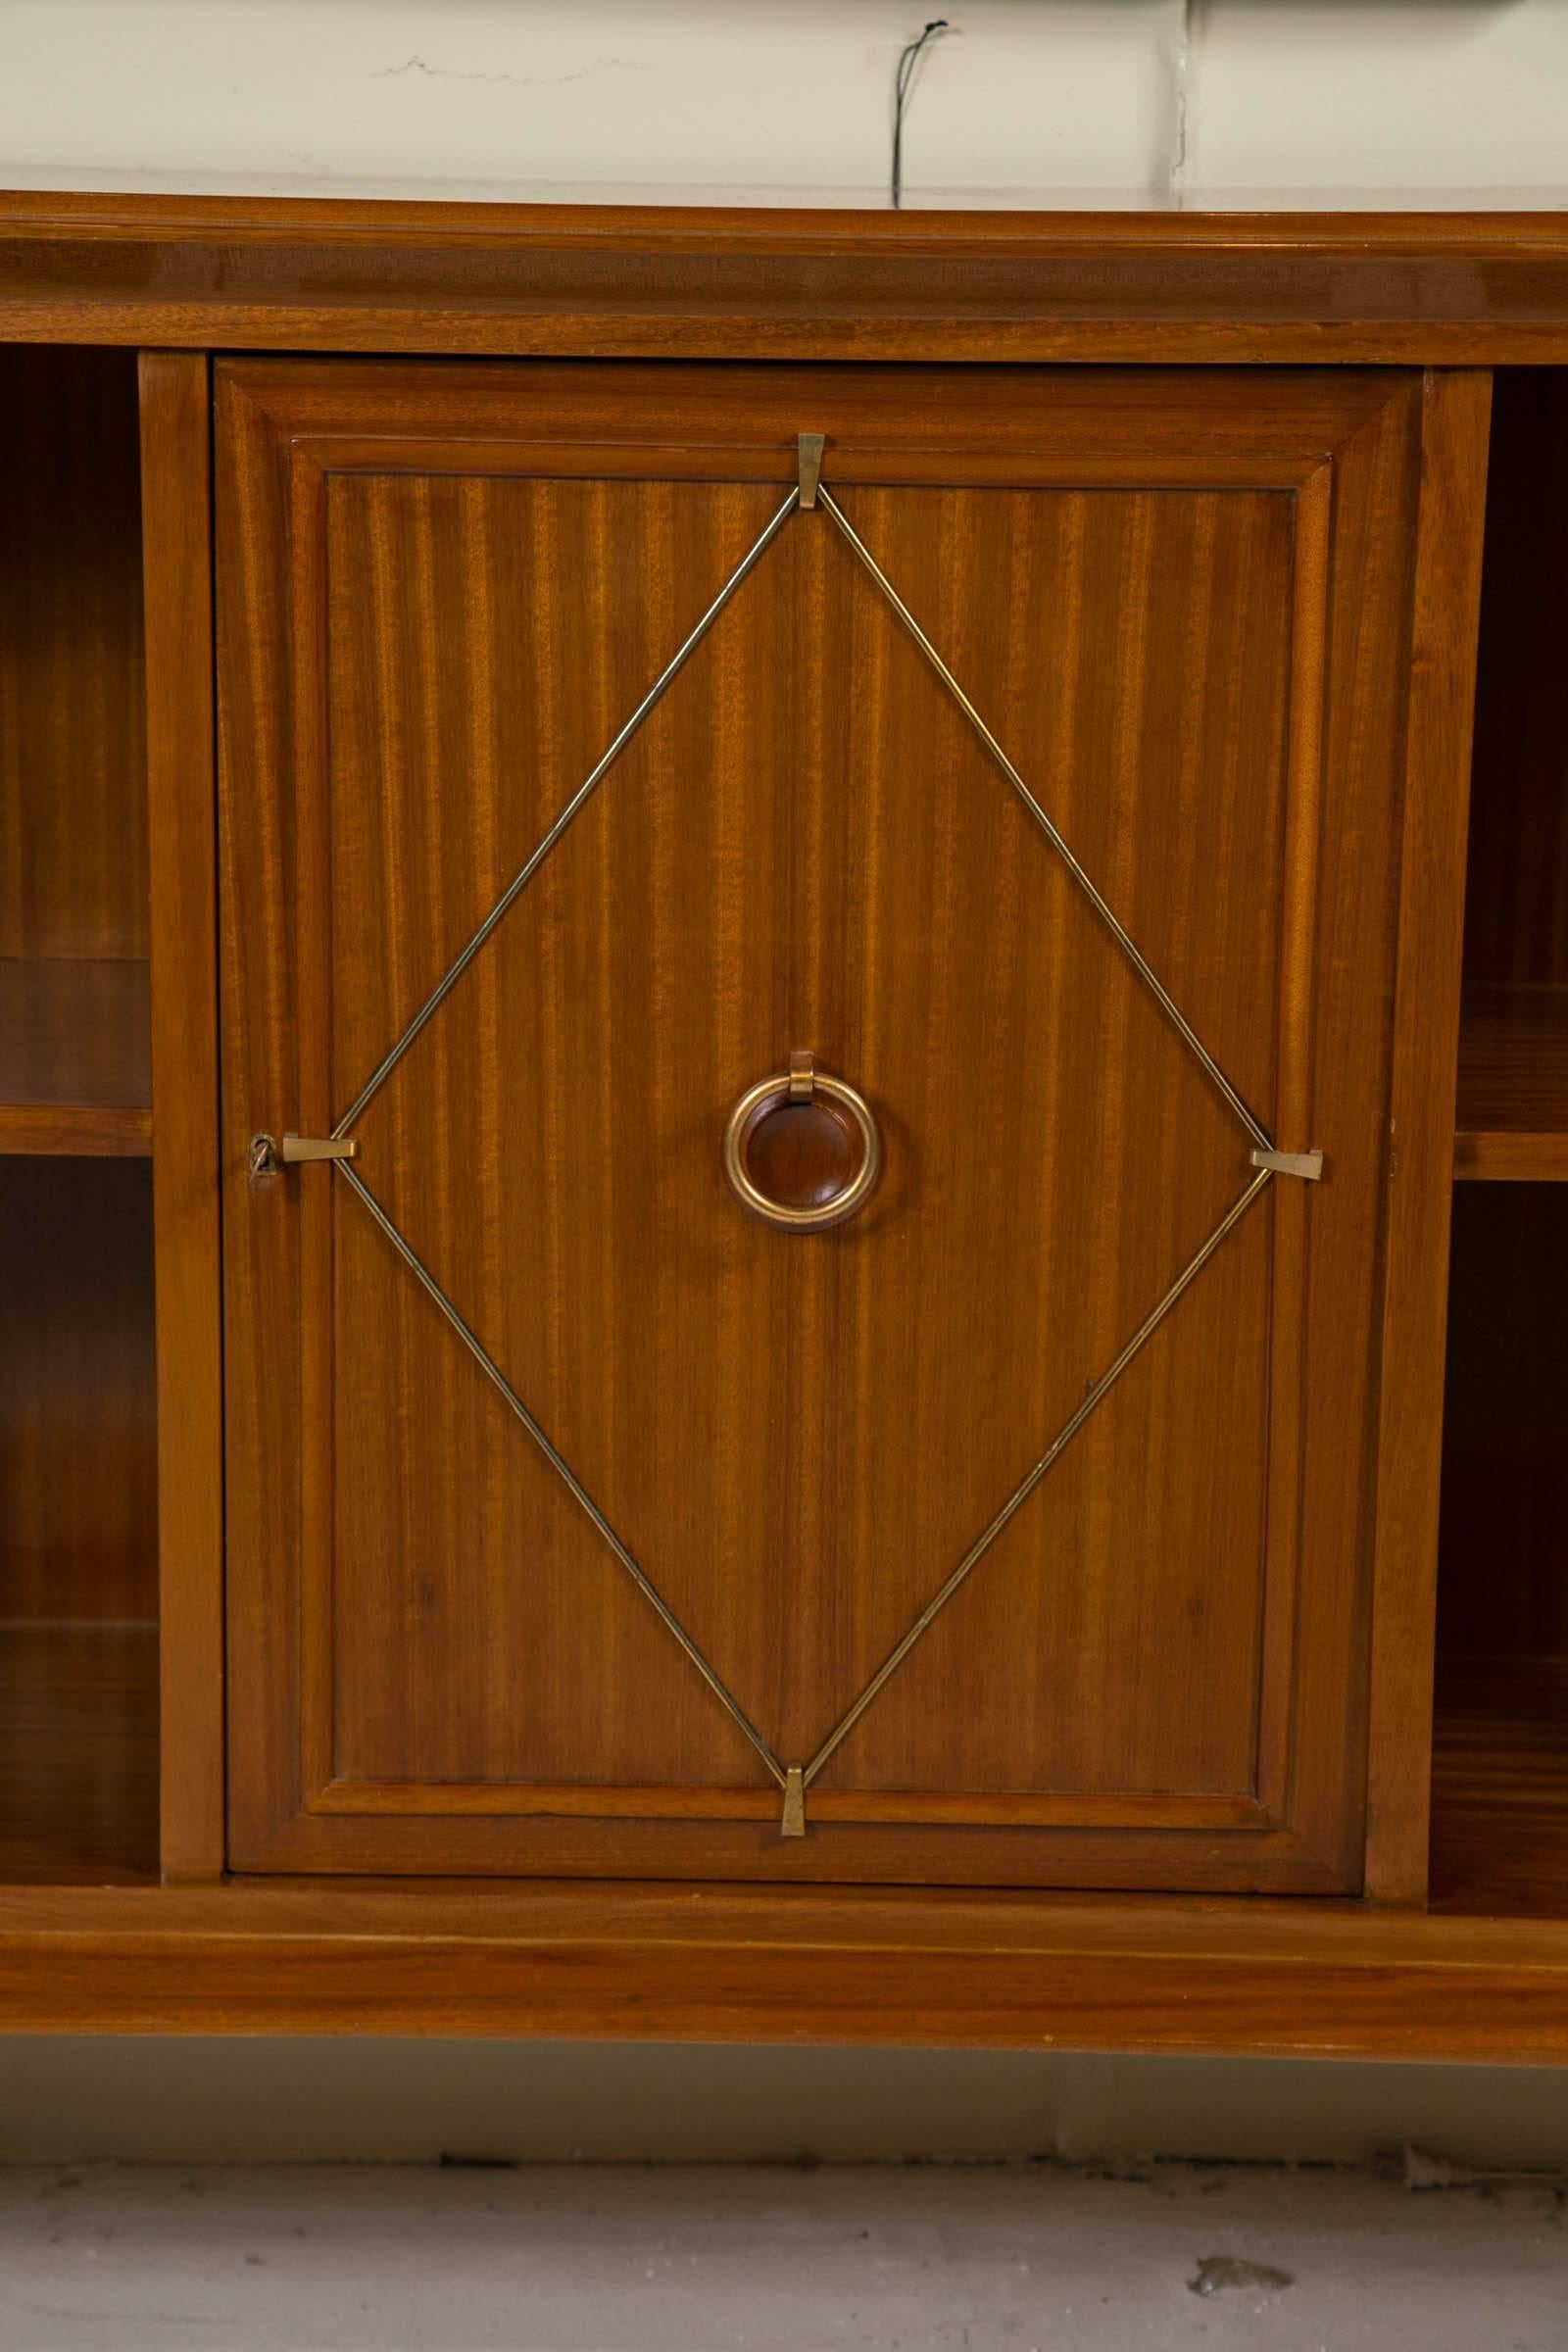 Pierre Lardin French Art Deco Cuban Mahogany Cabinet In Excellent Condition For Sale In Stamford, CT